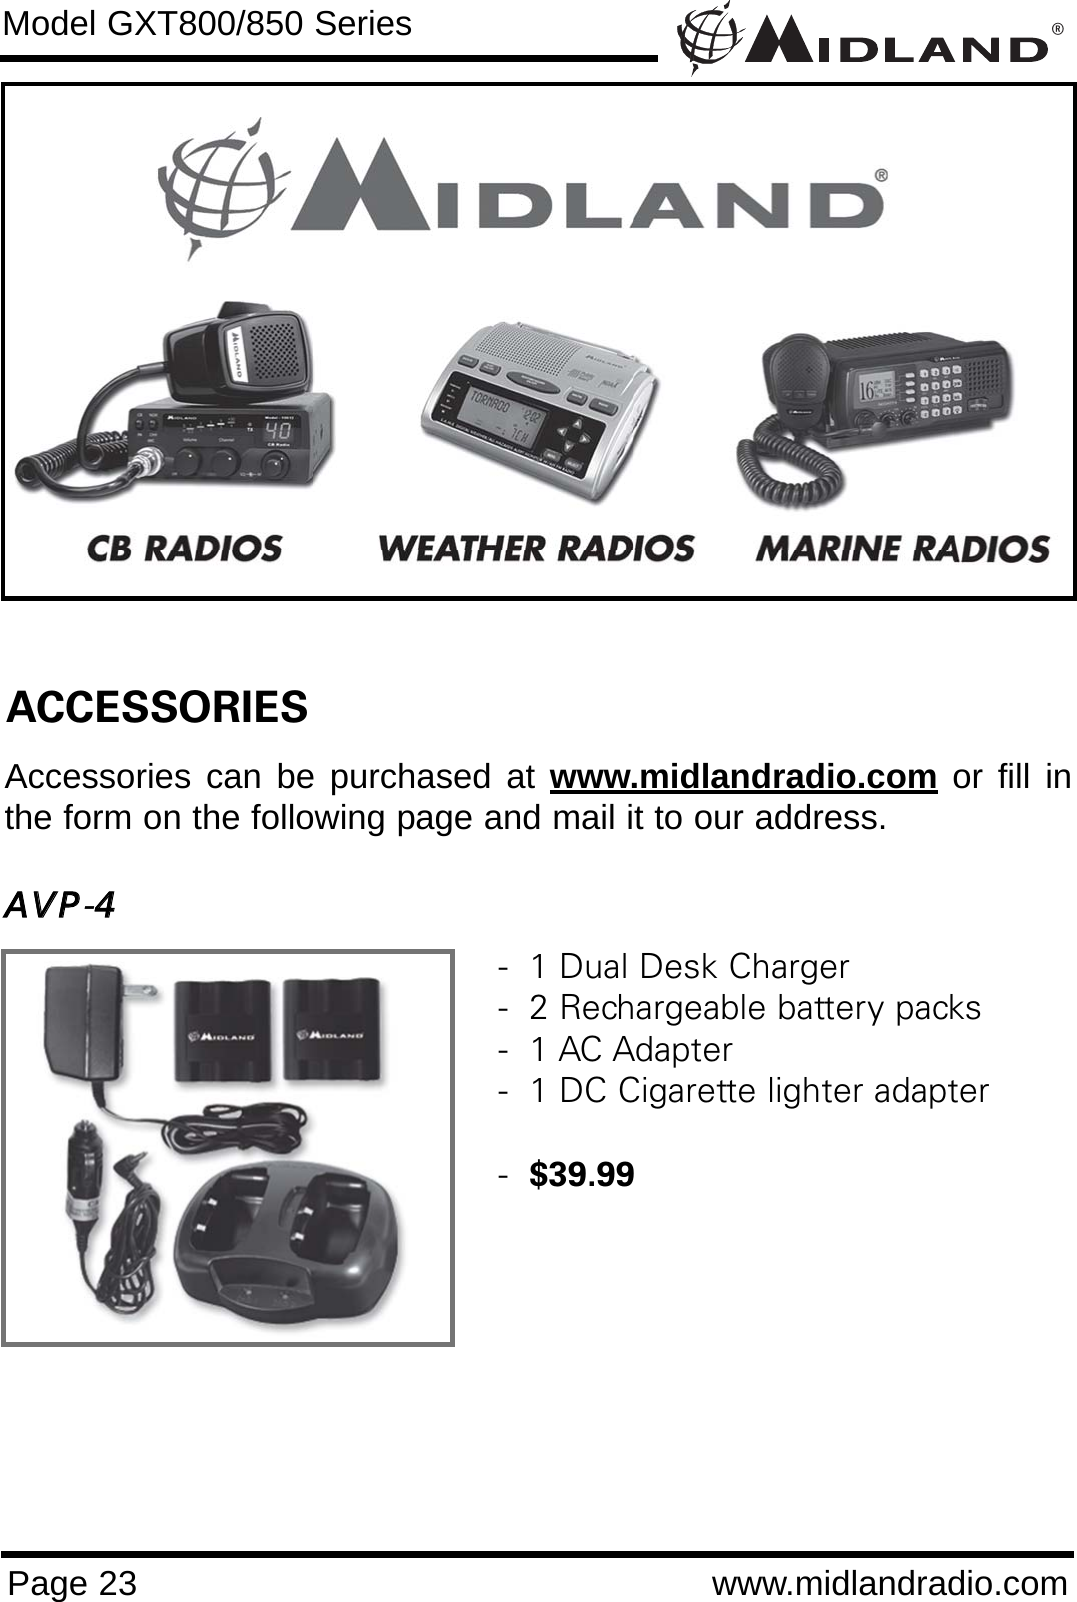 ®Page 23 www.midlandradio.comModel GXT800/850 SeriesACCESSORIESAccessories can be purchased at www.midlandradio.com or fill inthe form on the following page and mail it to our address.AAVVPP-44-  1 Dual Desk Charger-  2 Rechargeable battery packs-  1 AC Adapter-  1 DC Cigarette lighter adapter-  $39.99